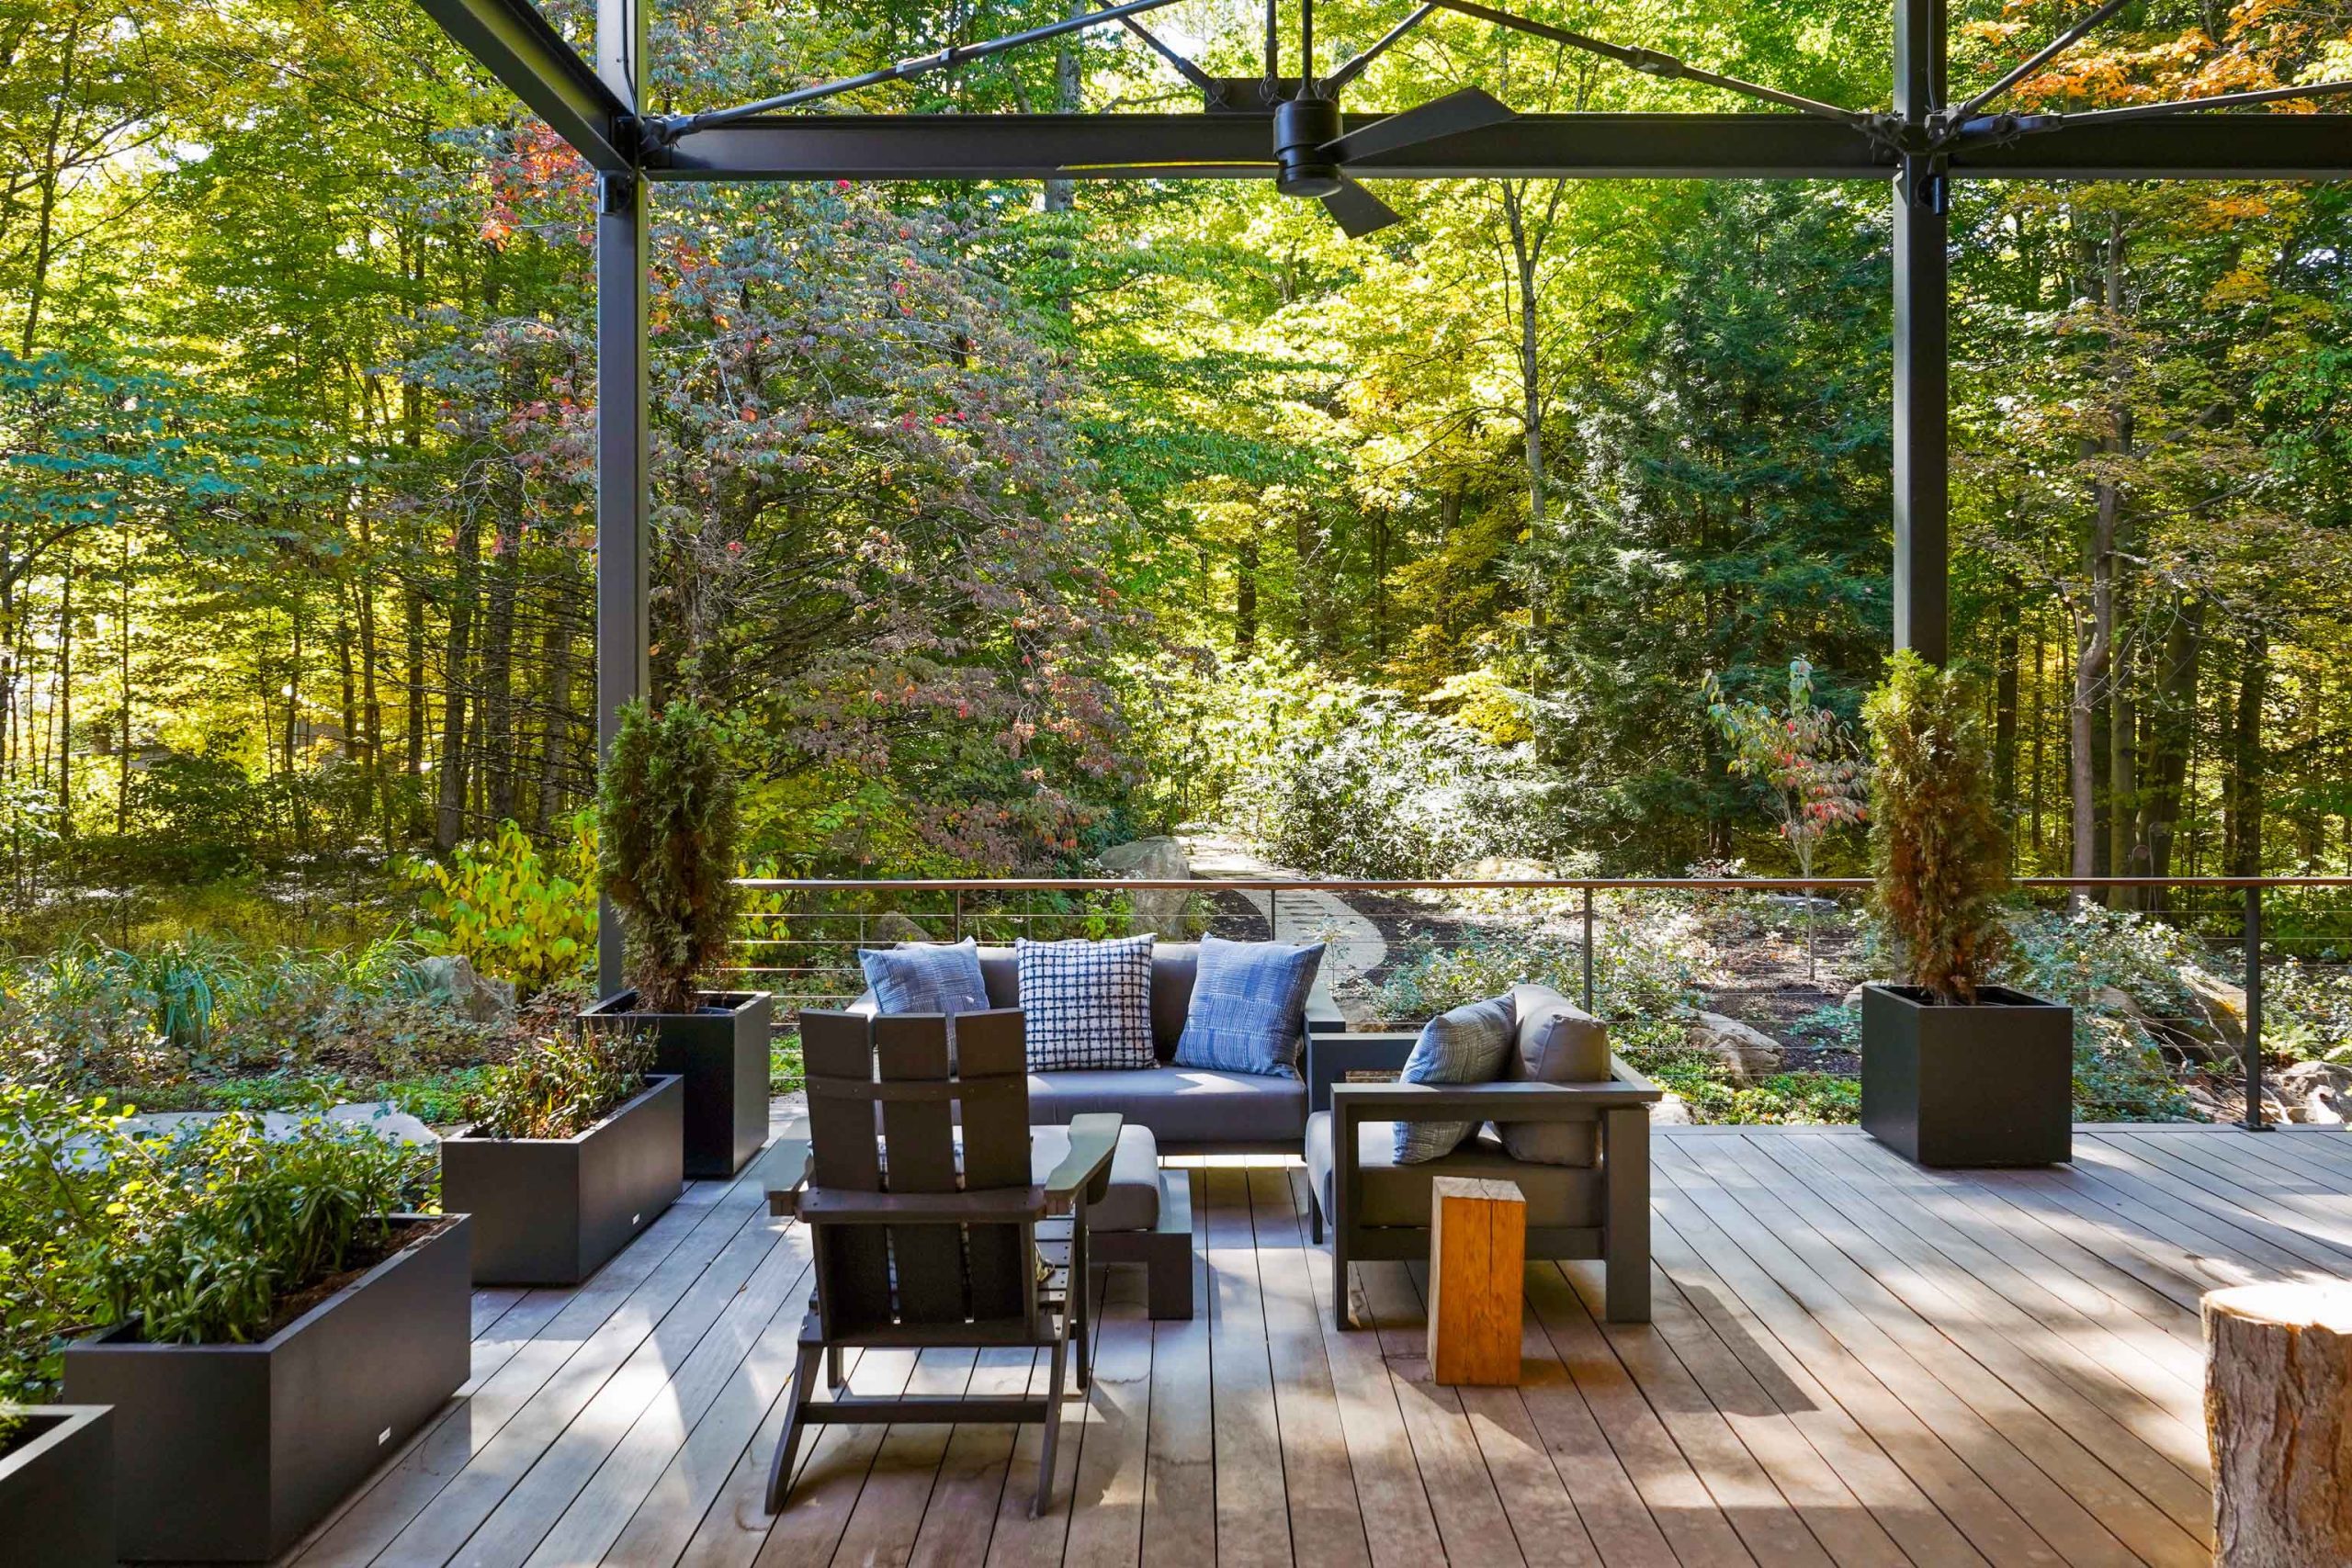 Patio with comfy chairs and plant vases is surrounded by colorful trees